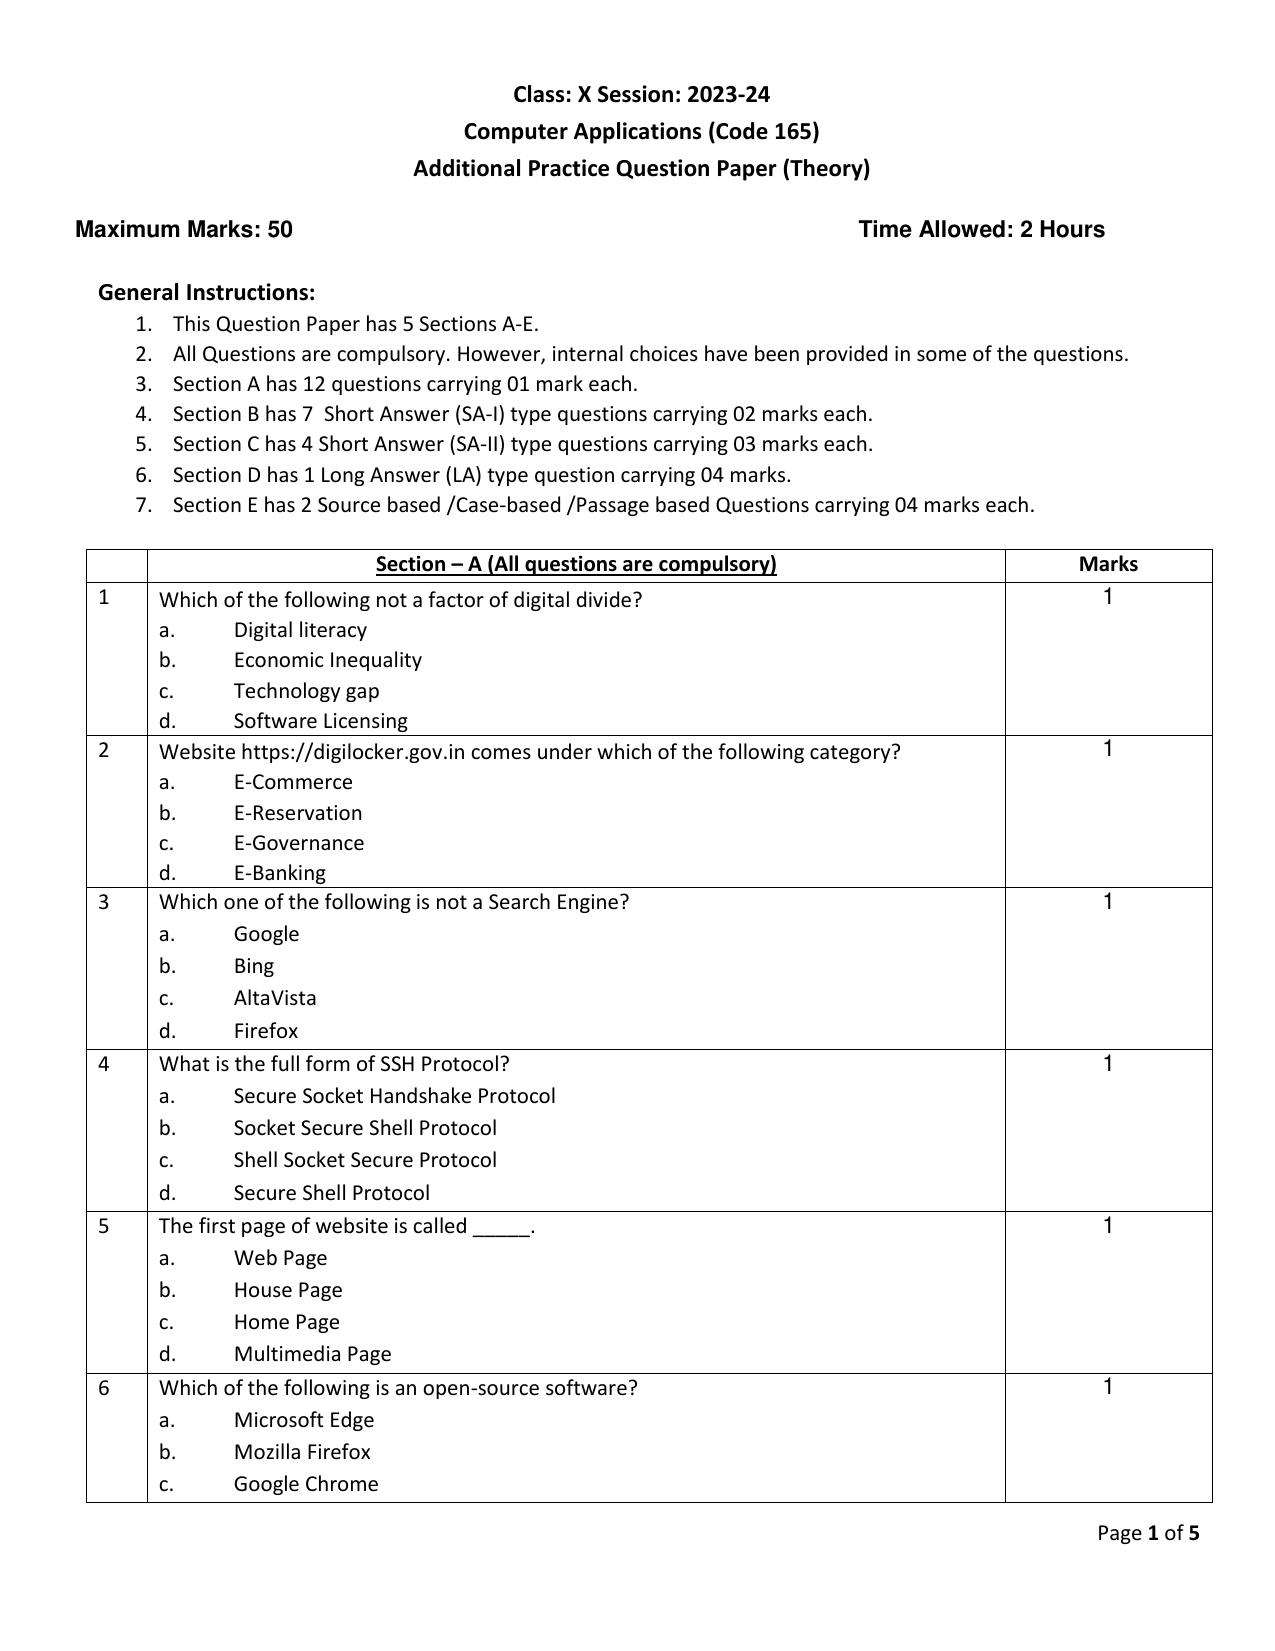 CBSE Class 10 Computer Applications Set 1 Practice Questions 2023-24 - Page 1